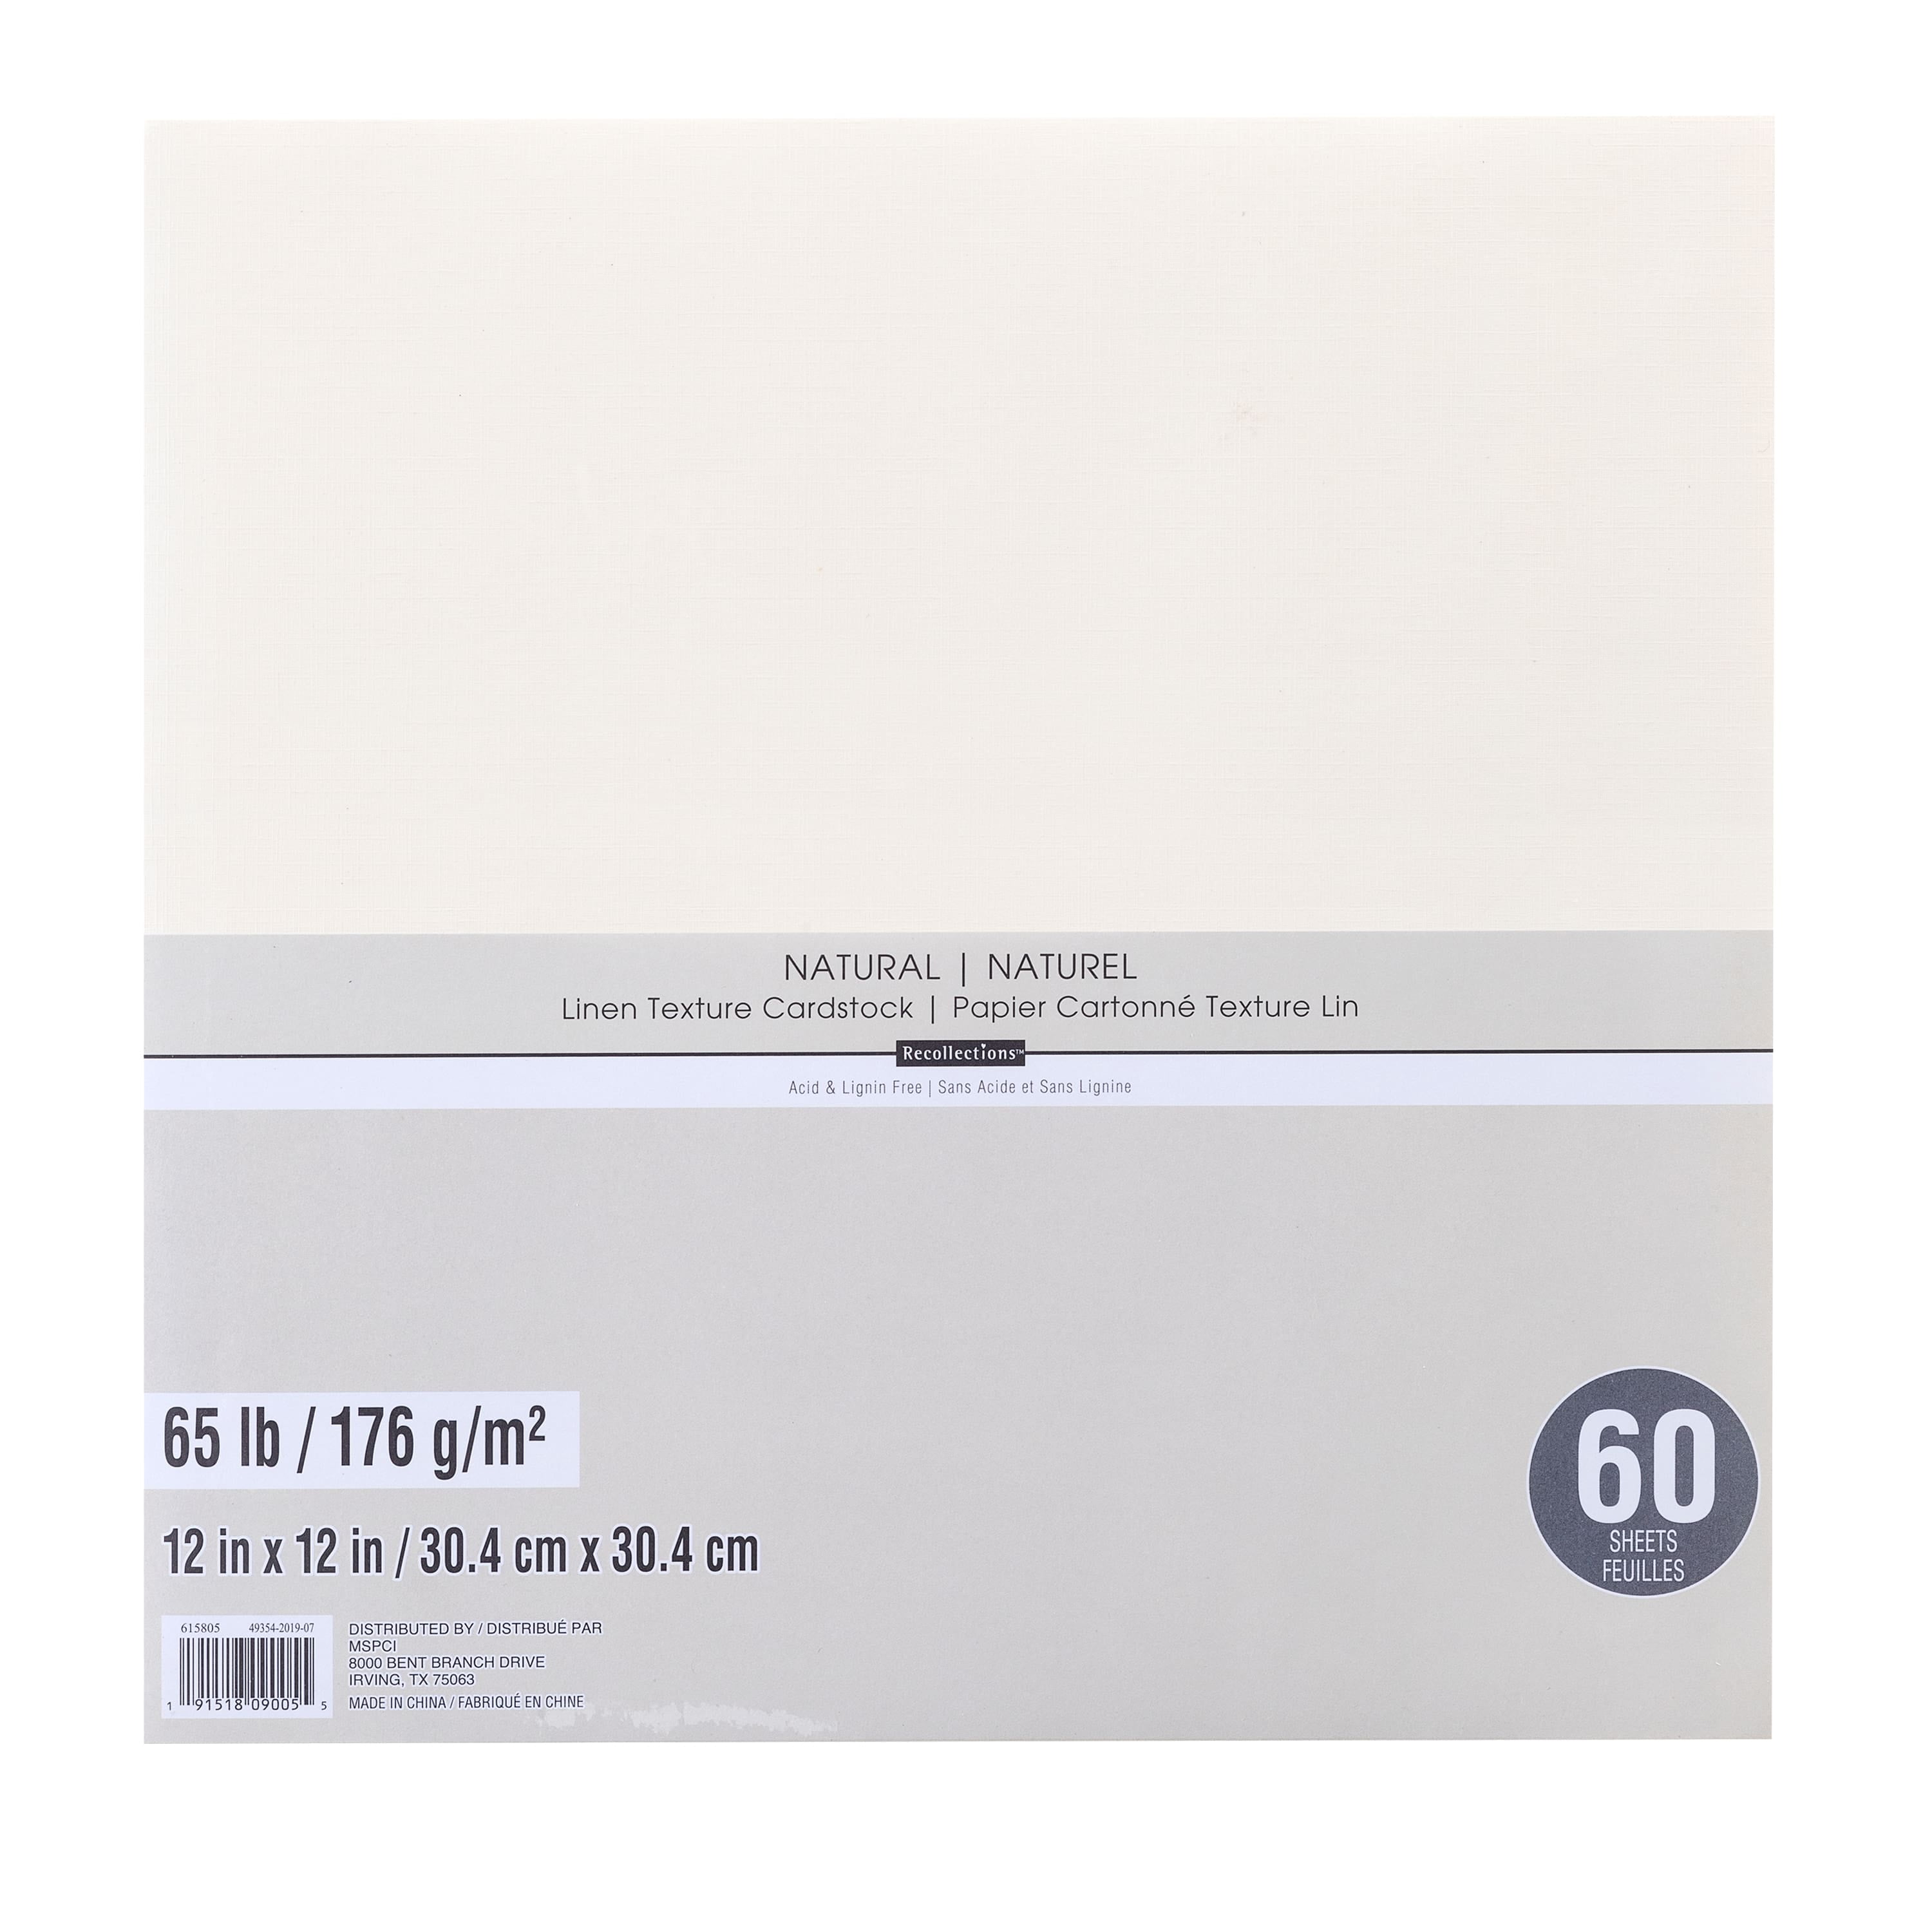 PA Paper™ Accents Black 12 x 12 80lb. Smooth Cardstock, 1000 Sheets